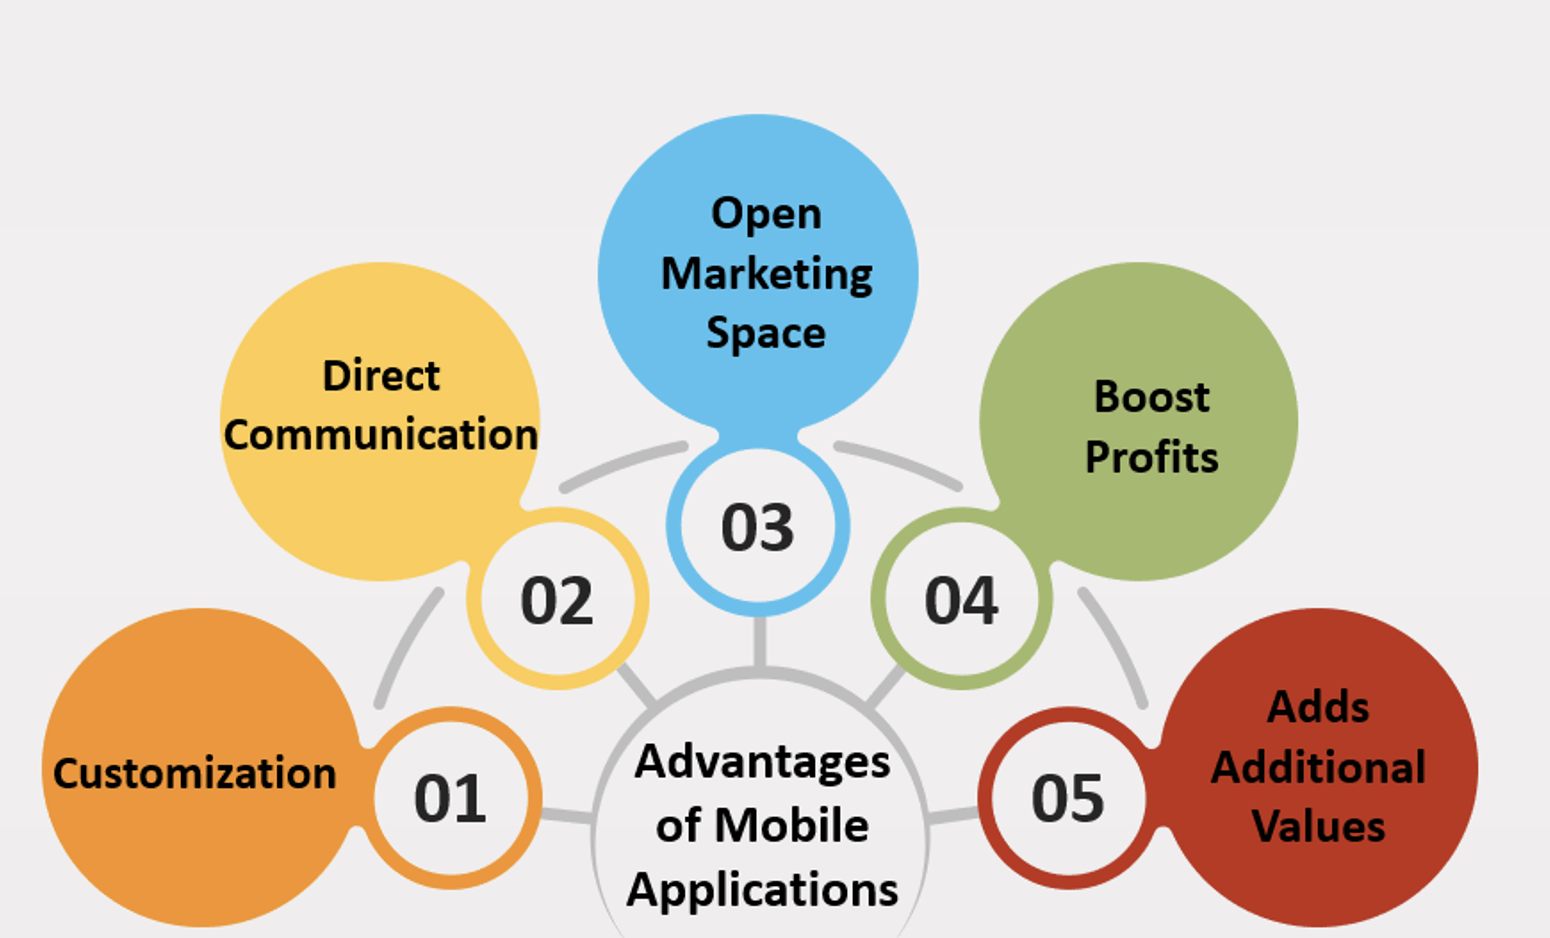 The Advantages of Mobile Applications